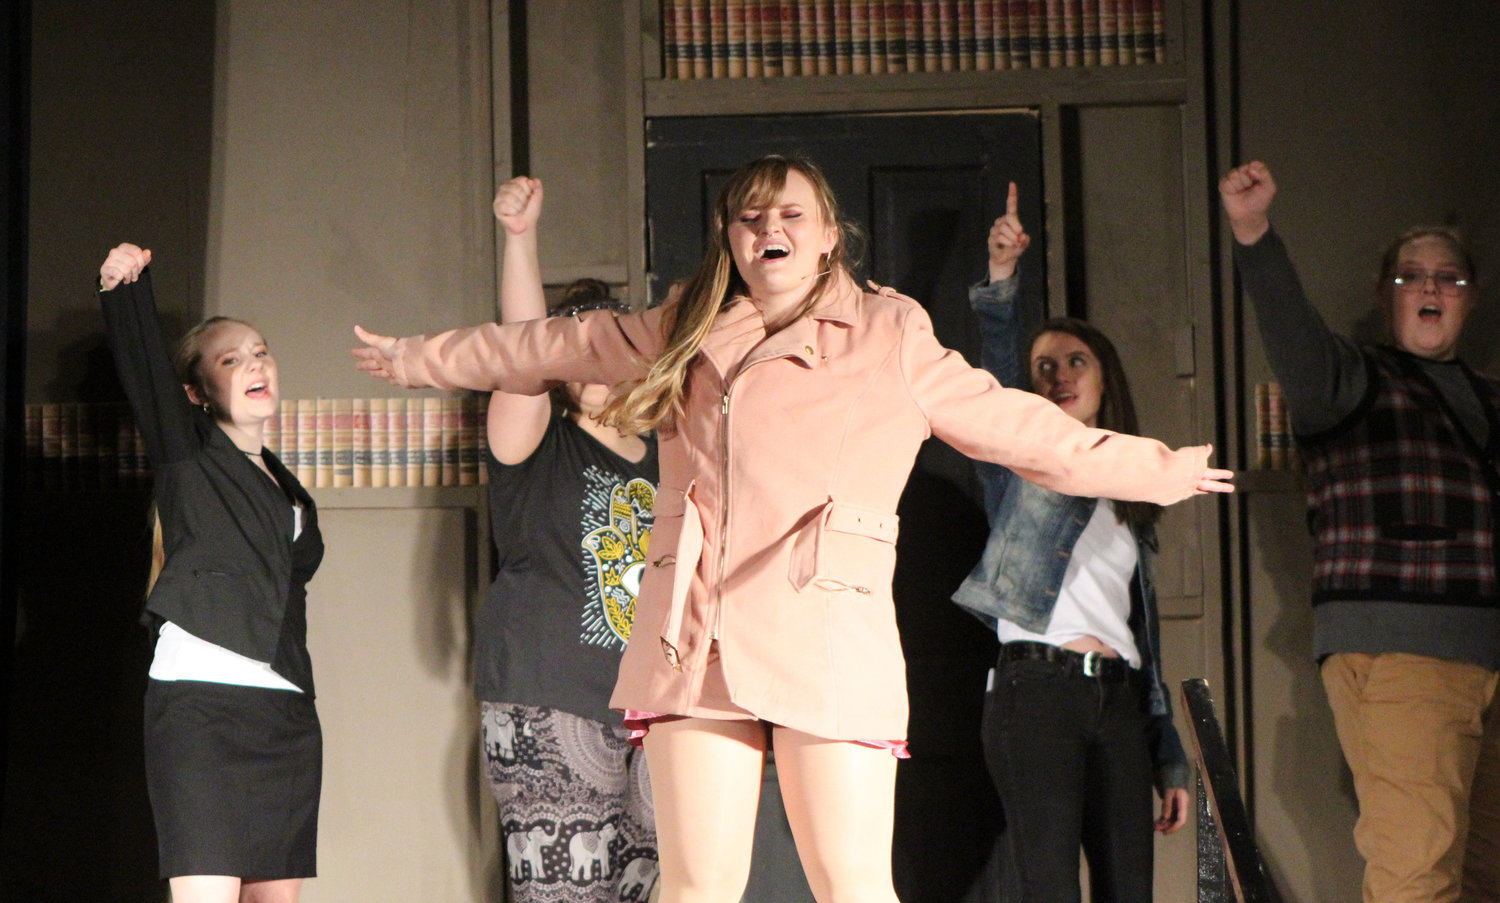 Elle (Nicole Mickelson) sings along with her Harvard Law School classmates during Highland High School's presentation of Legally Blonde – The Musical.